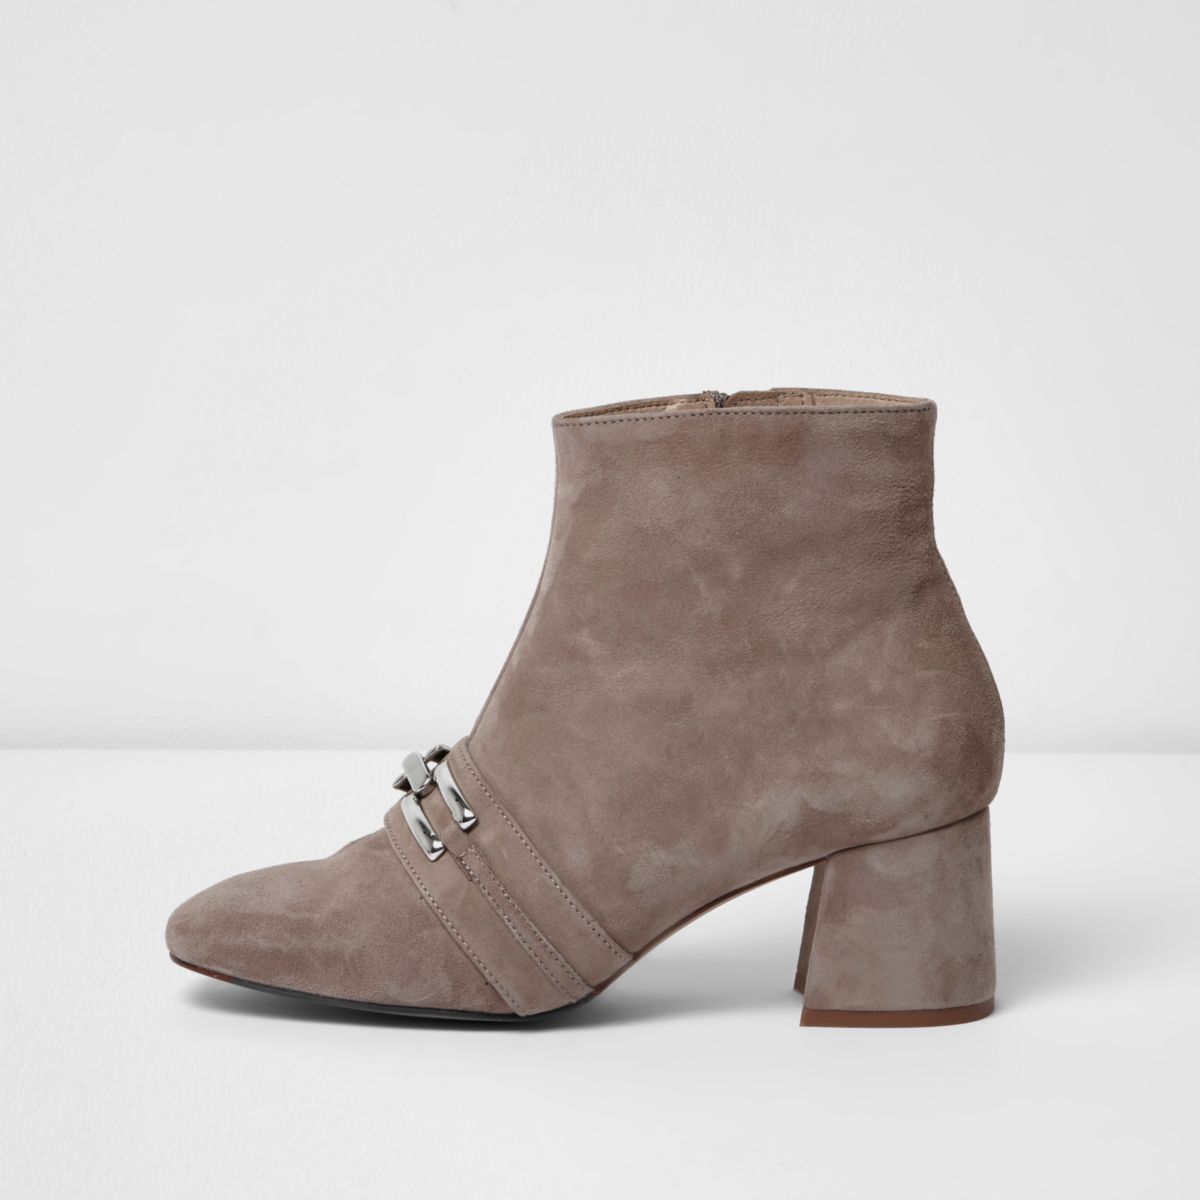 Nude suede chain link ankle boots - RI Limited Edition - Sale - women